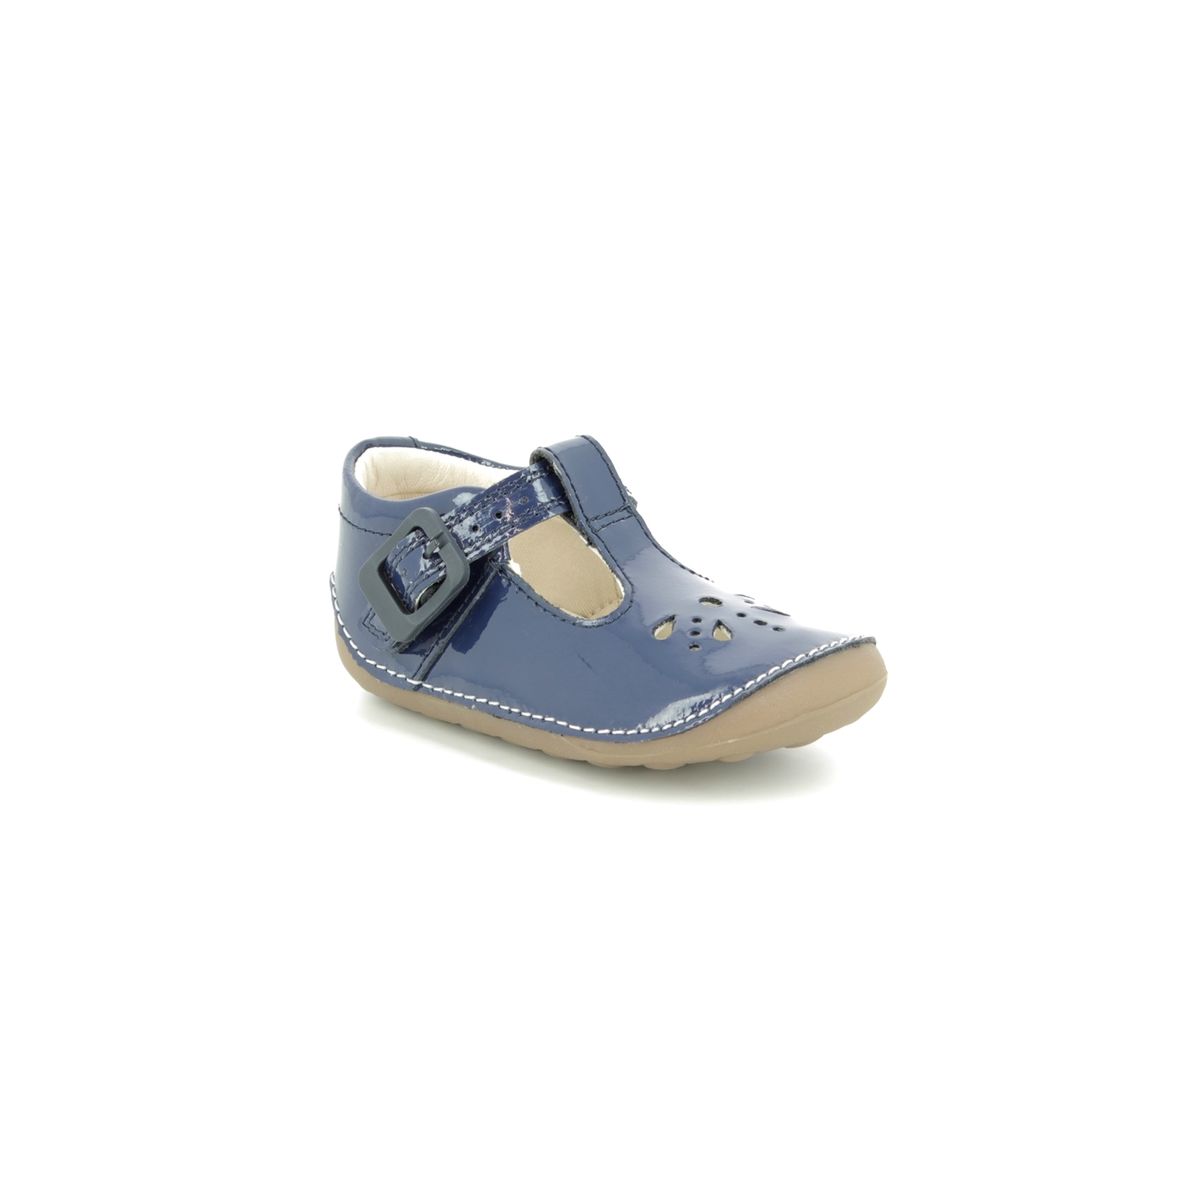 Clarks Little Weave Navy patent Kids girls first and baby shoes 3981-27G in a Plain Leather in Size 4.5